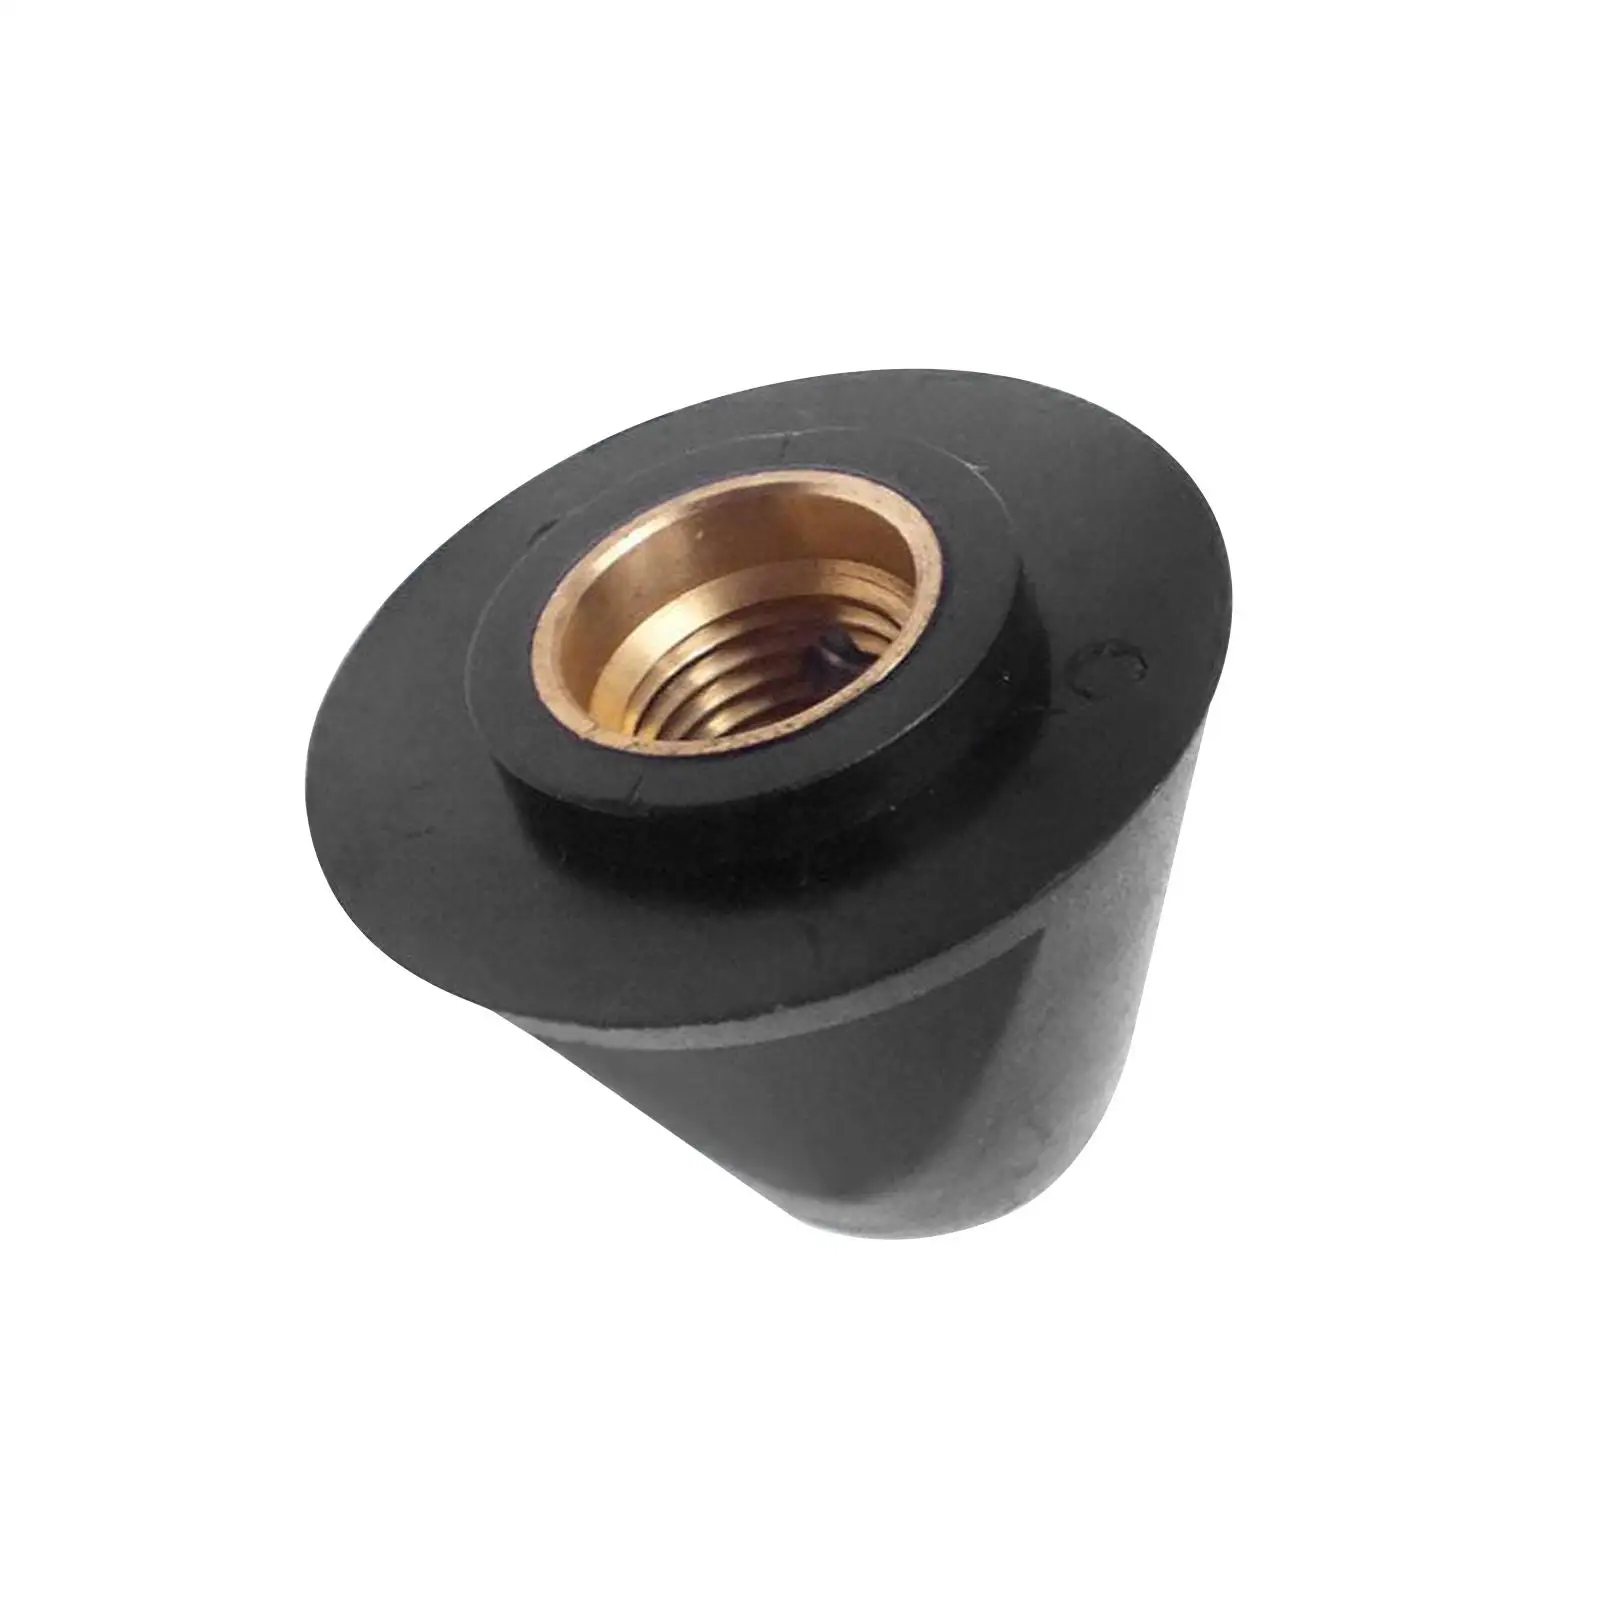 Boat Propeller Prop Nut Spare Parts for Yamaha Outboard Engine 4HP 5HP 2T Engine Parts High Performance Easy Installation